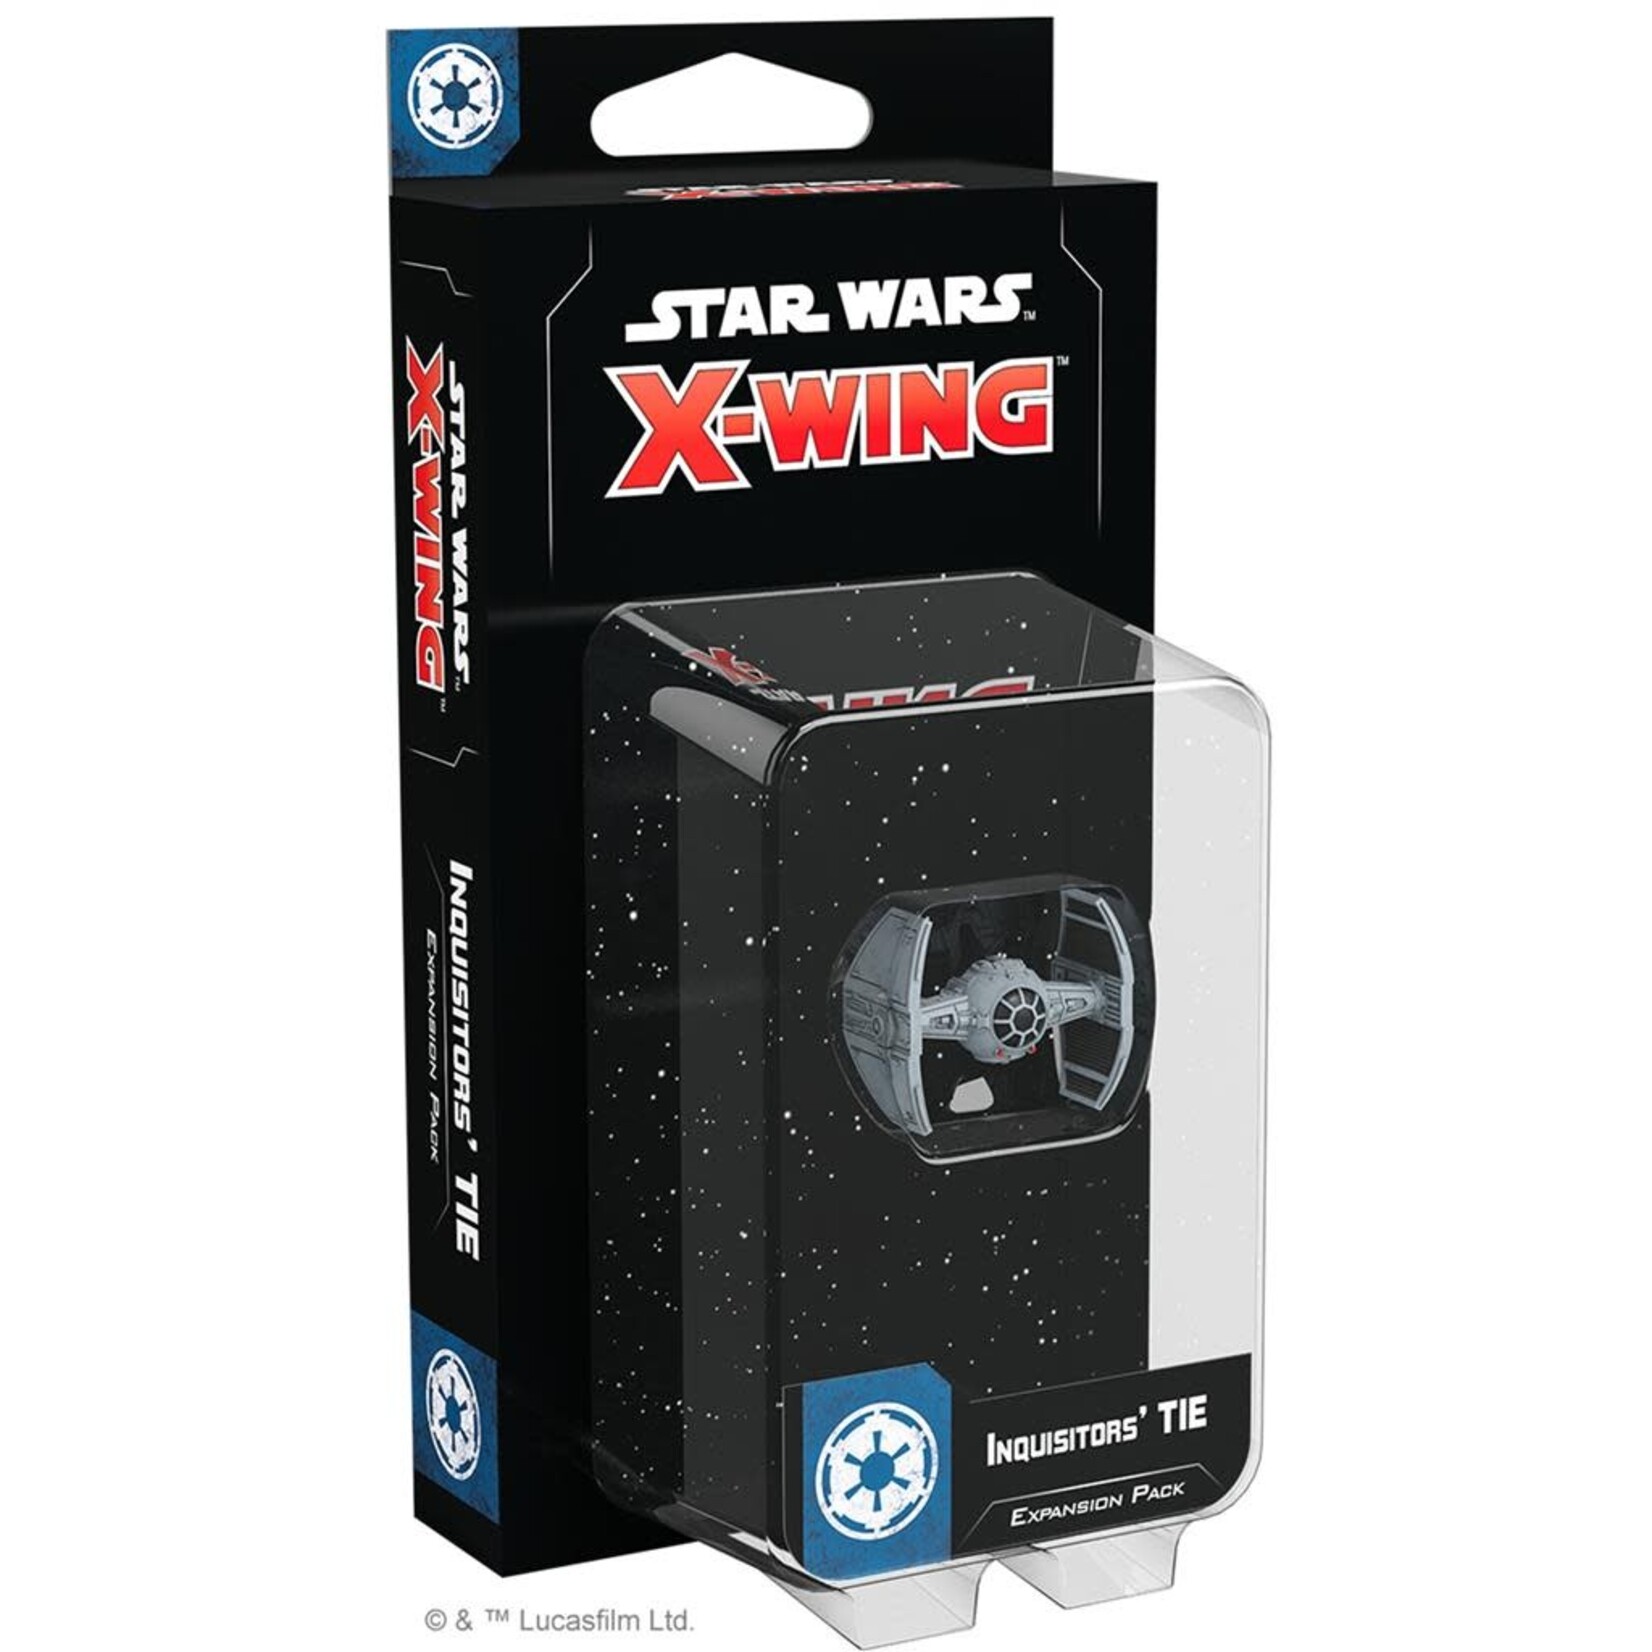 Fantasy Flight Games Star Wars: X-Wing 2nd Edition - Inquisitors TIE Expansion Pack